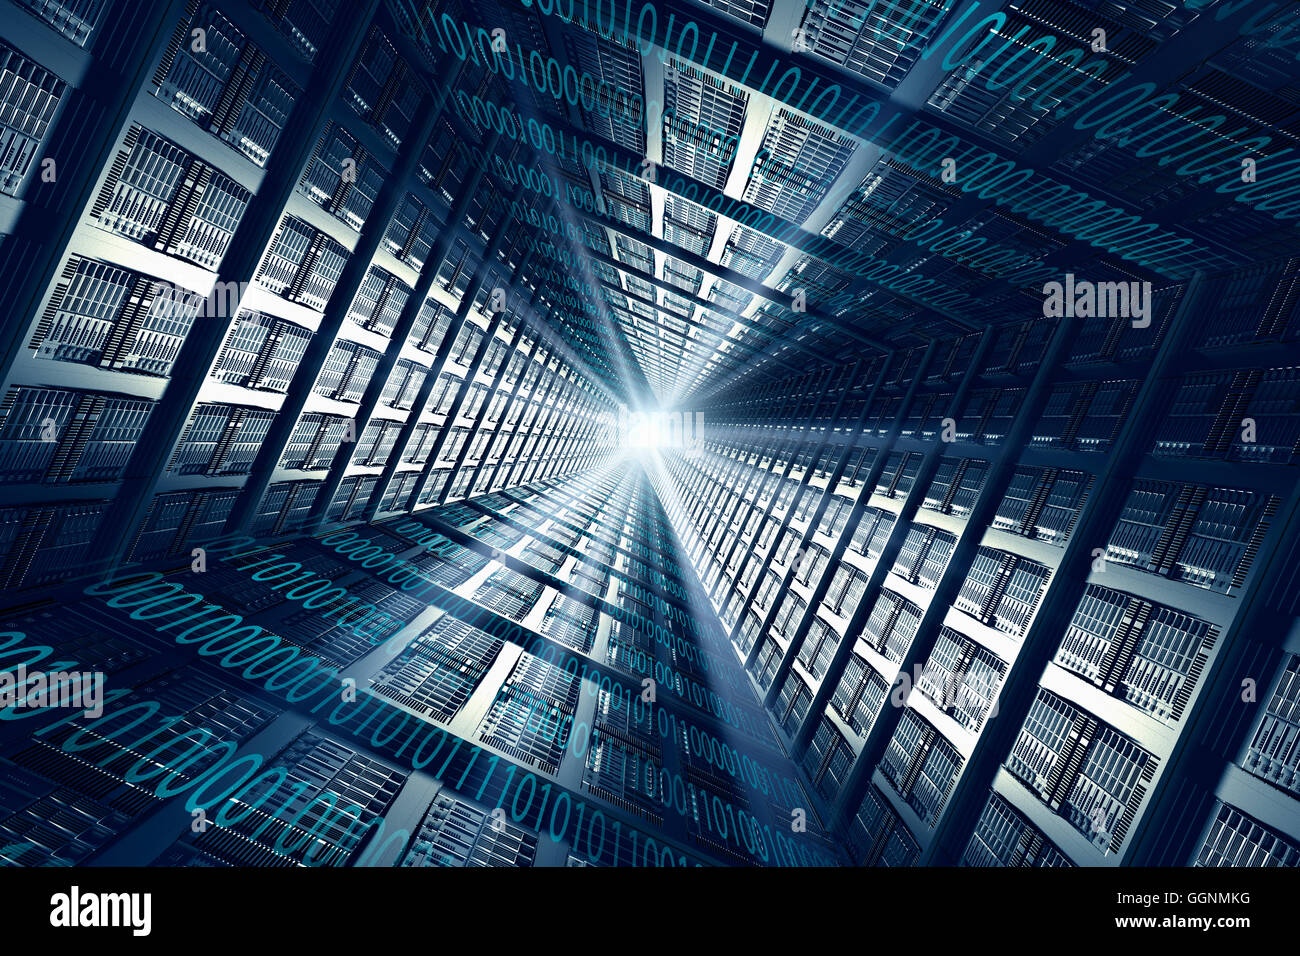 Light shining from binary code and computer servers Stock Photo